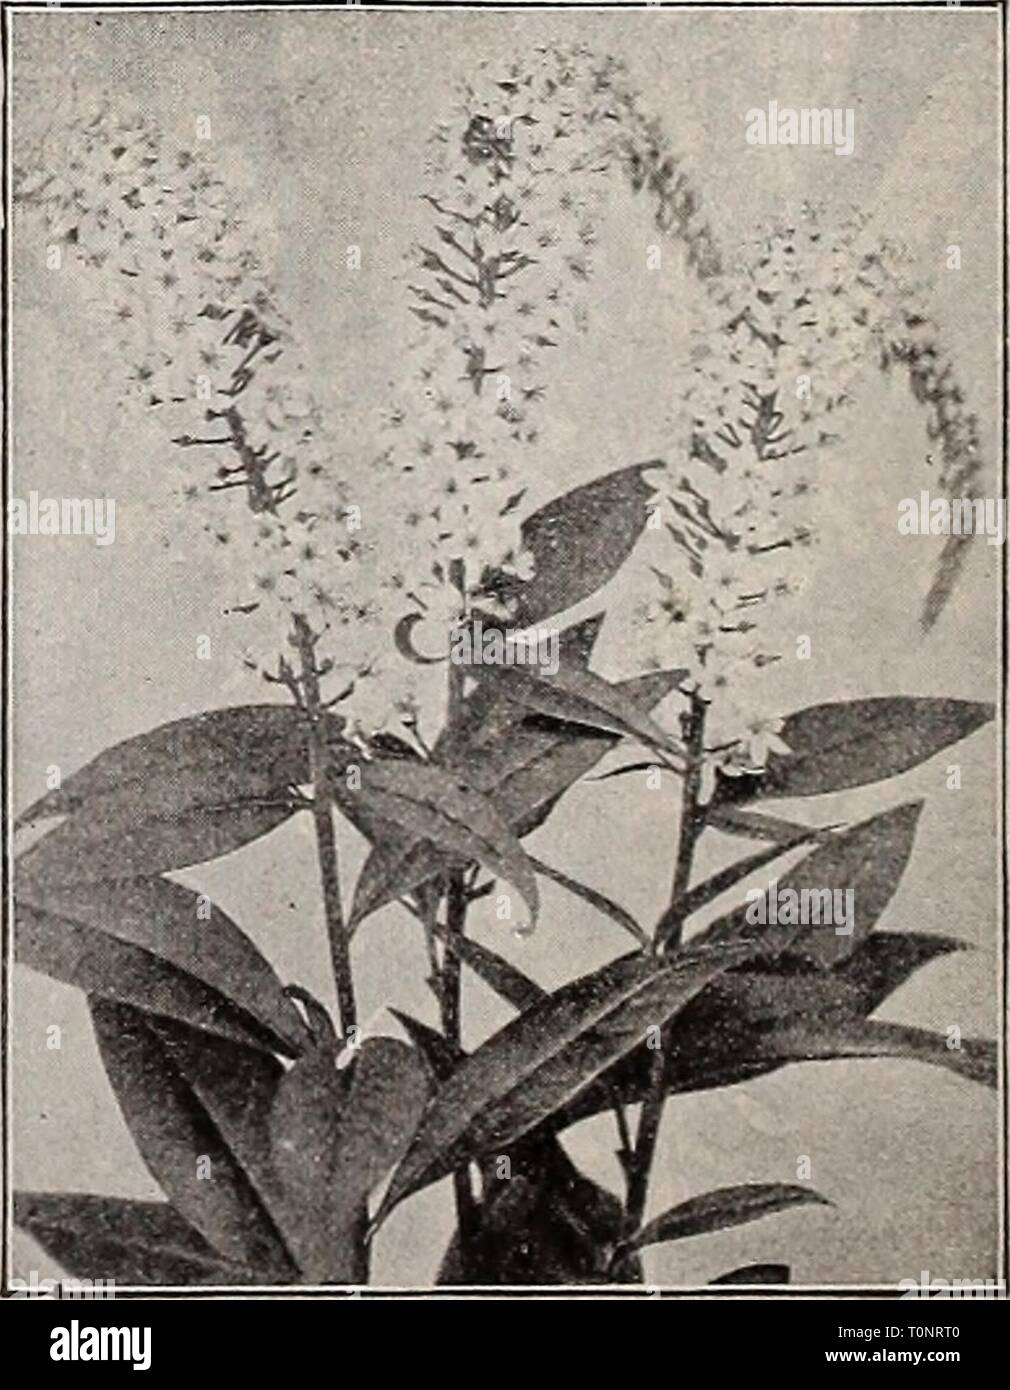 Dreer's autumn catalogue 1906 (1906) Dreer's autumn catalogue 1906  dreersautumncata1906henr Year: 1906  Hemekocallis Florham. Glechoma, or Nepeta ( Variegated Groundsel, or Ground Ivy). A valuable creeper for rockery. 10 cts. each; $1.00 per doz. Gjpsophila Paiiiculata (Baby's Breath). Large panicles ot minute white flowers in August and September; 3 ft. Pauiculata H. pi. A new double-flowering variety. 35 cts. each ; §3.50 per doz. Repeus. A trailing variety, pure white, tinged pink. Heieniuin Aiitumnale Superba (Suewe-wor^). Deep golden- yellow flowers ; August and September; 5 to 6 ft. Gra Stock Photo